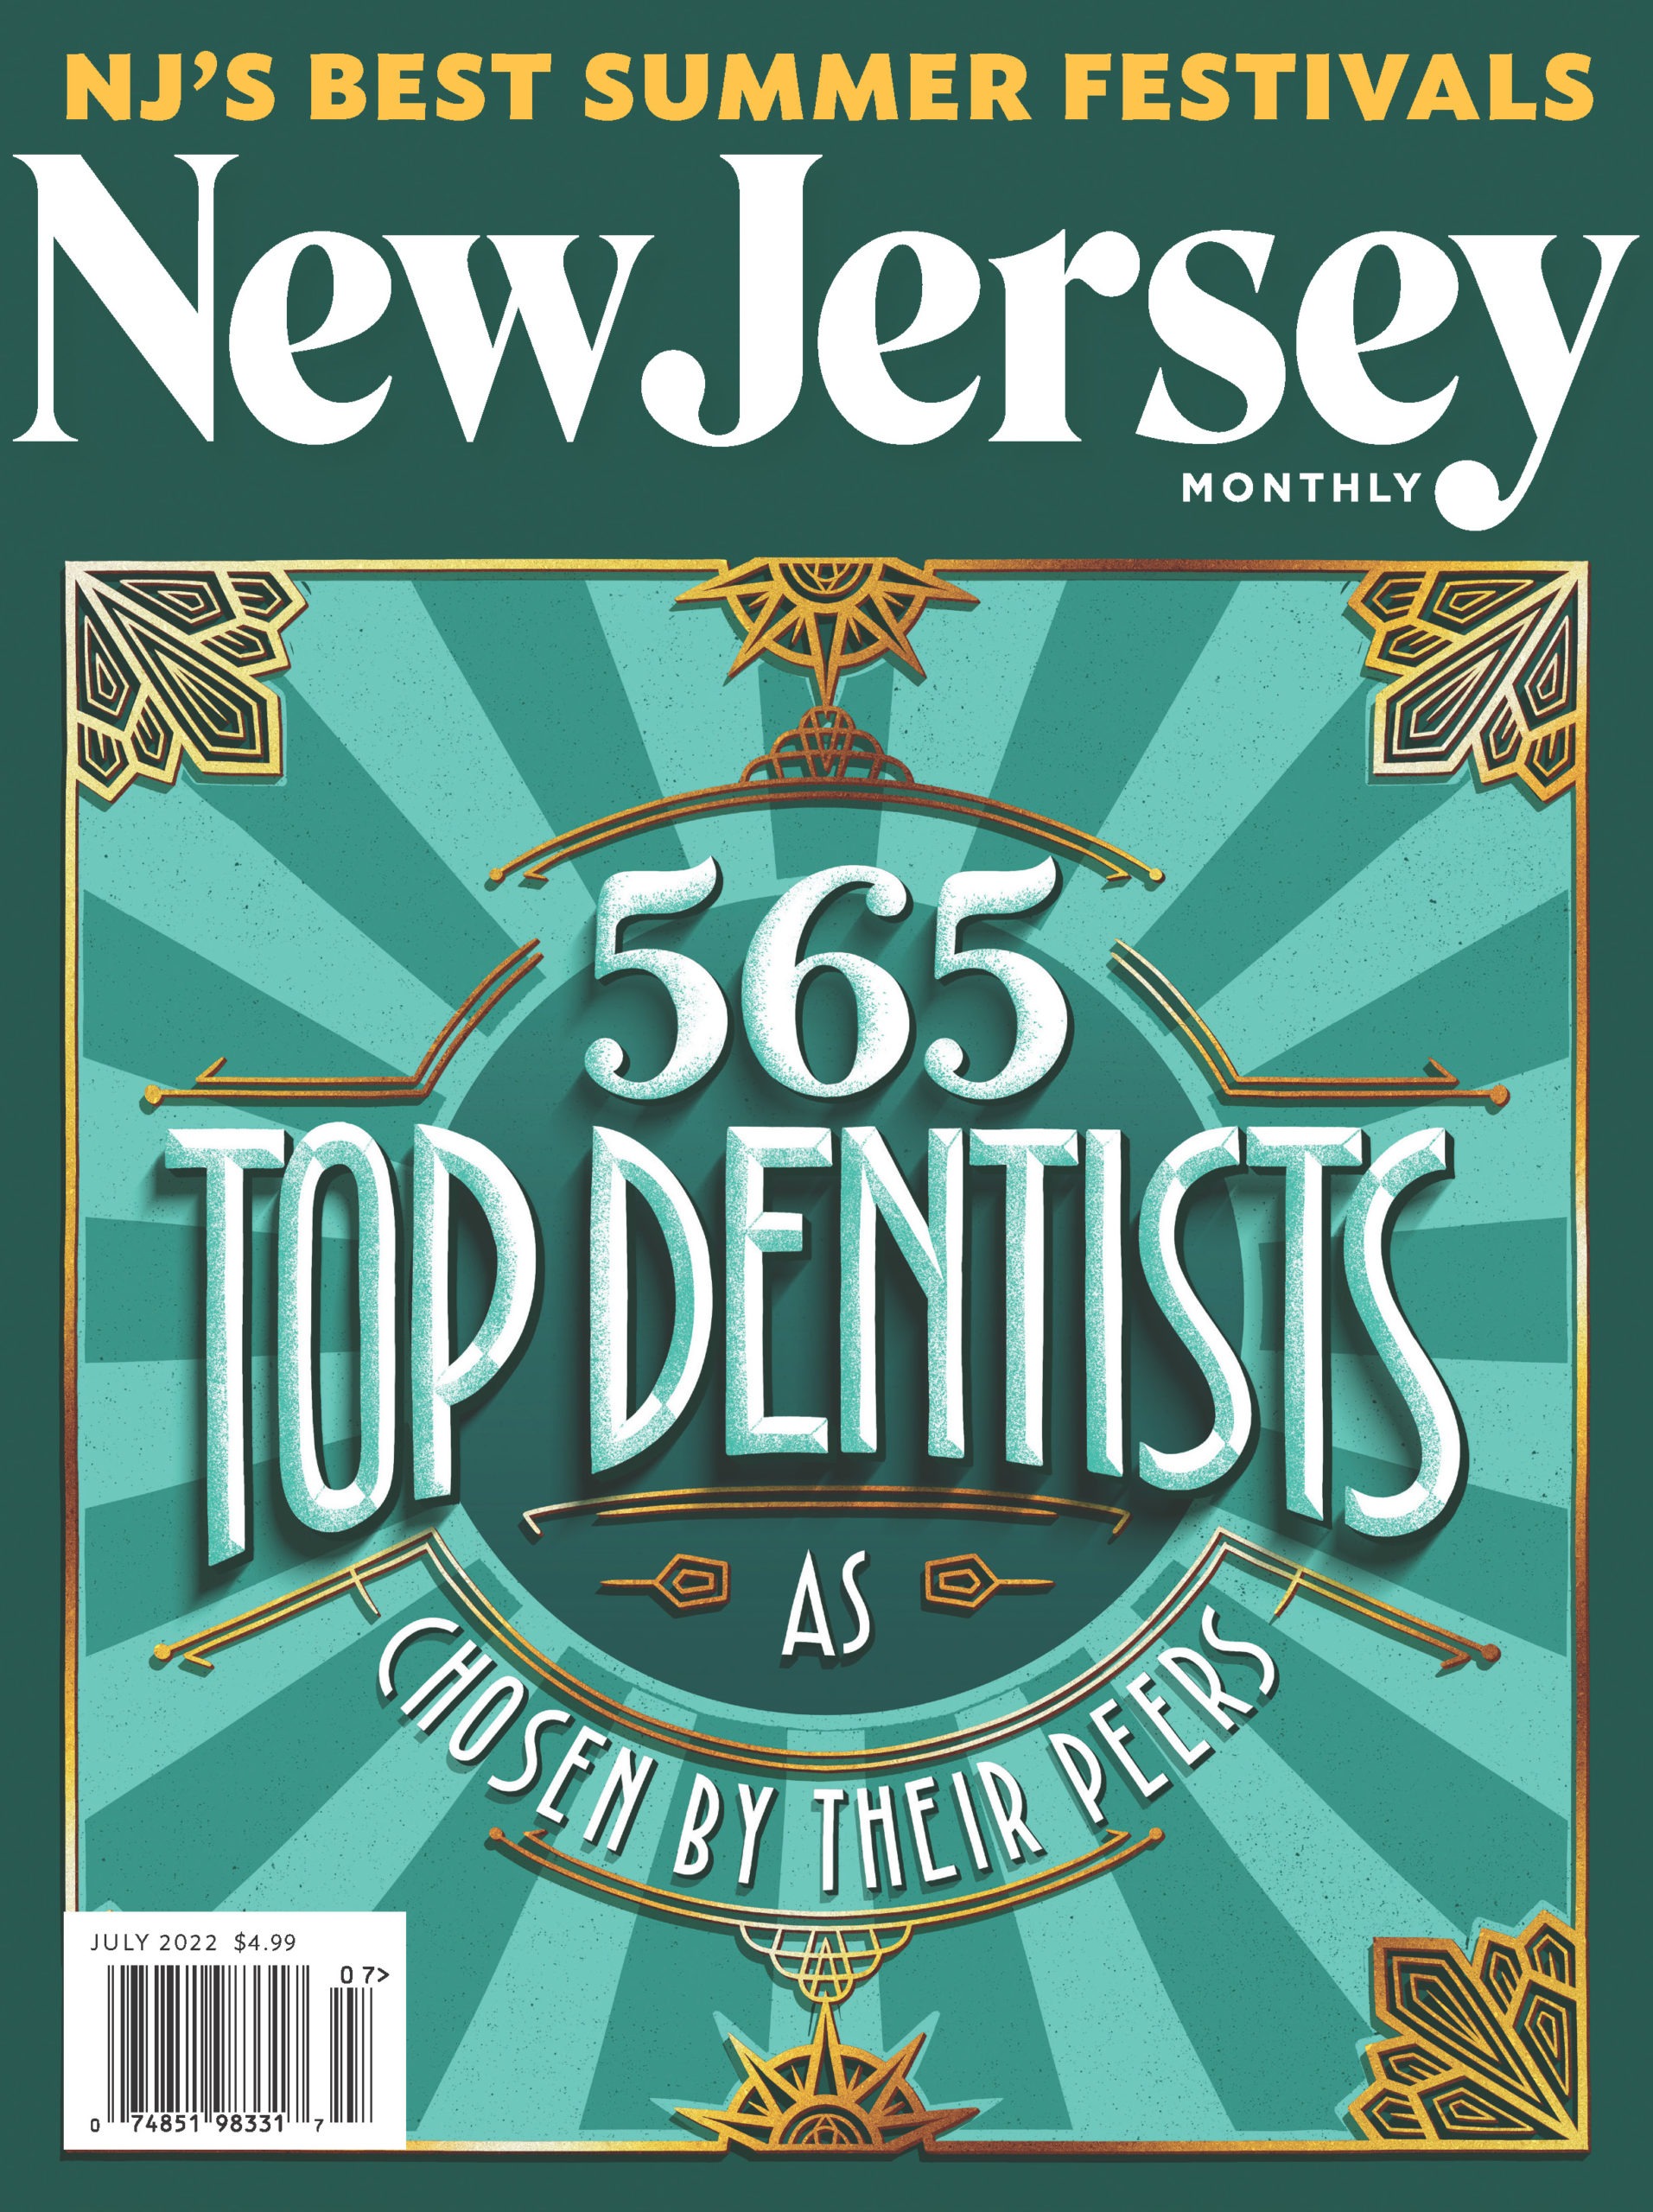 The cover of New Jersey Monthly's July 2022 issue.